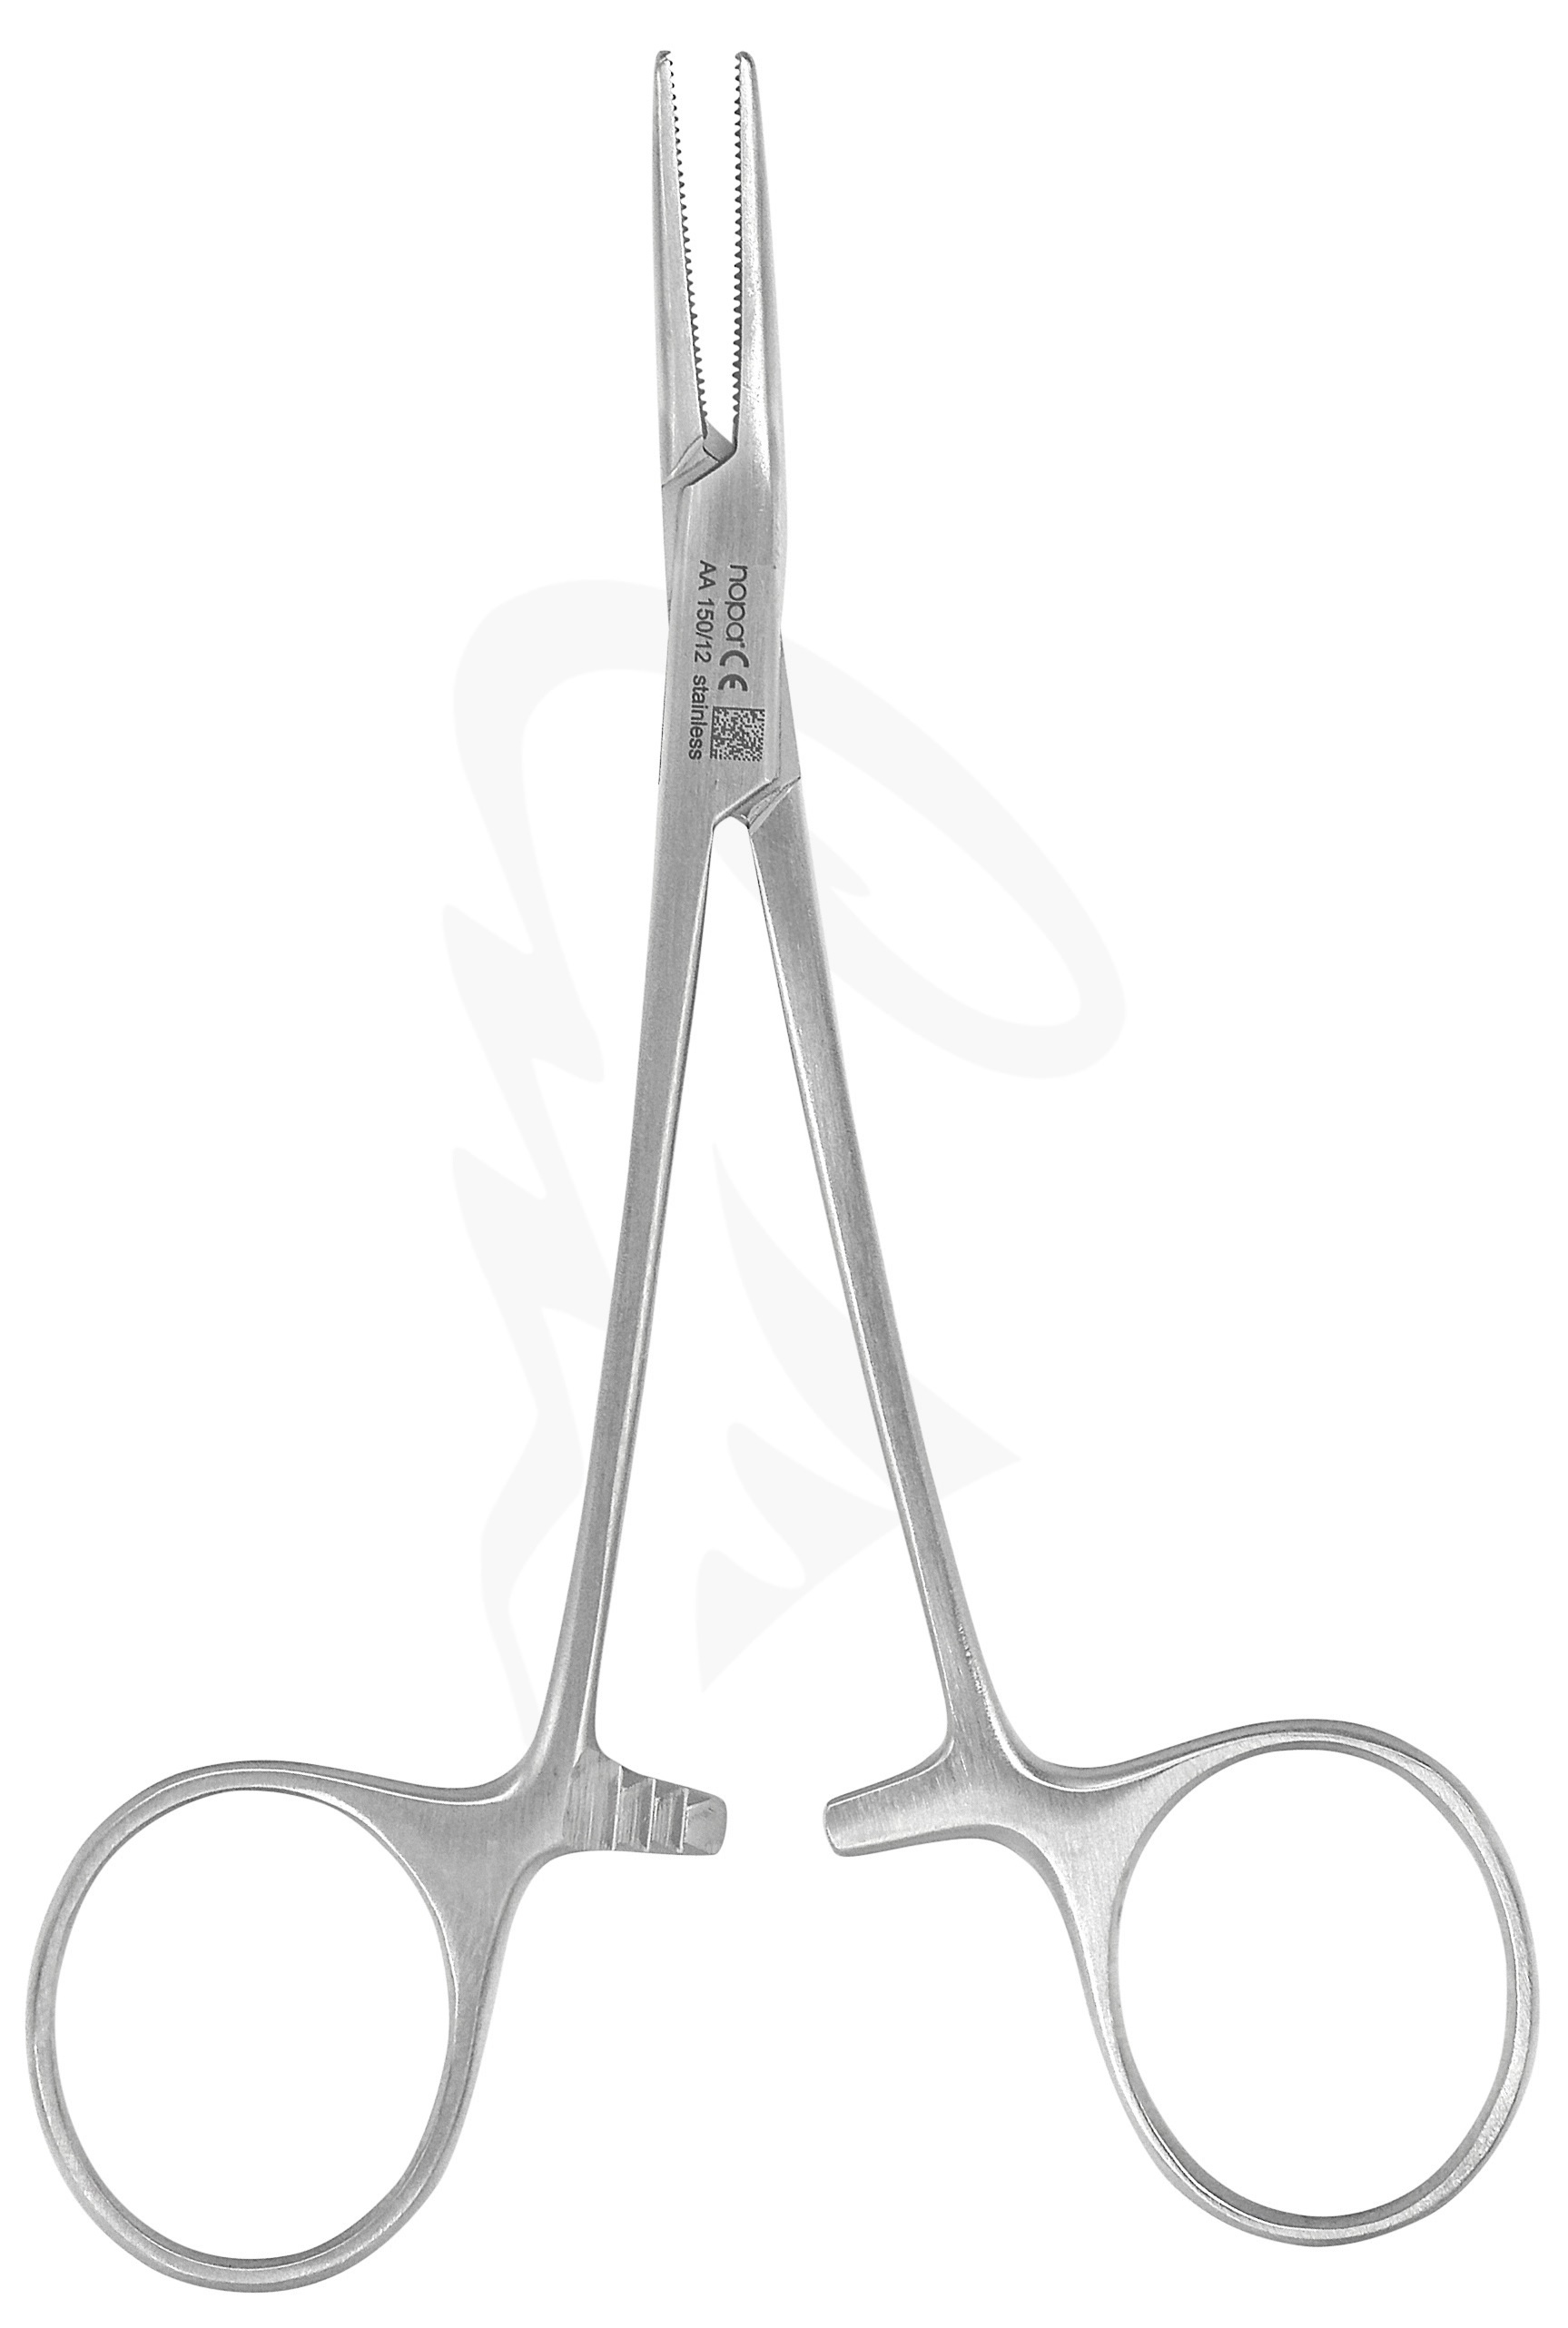 Nopa Halsted-Mosquito Artery Forcep Straight 12.5cm